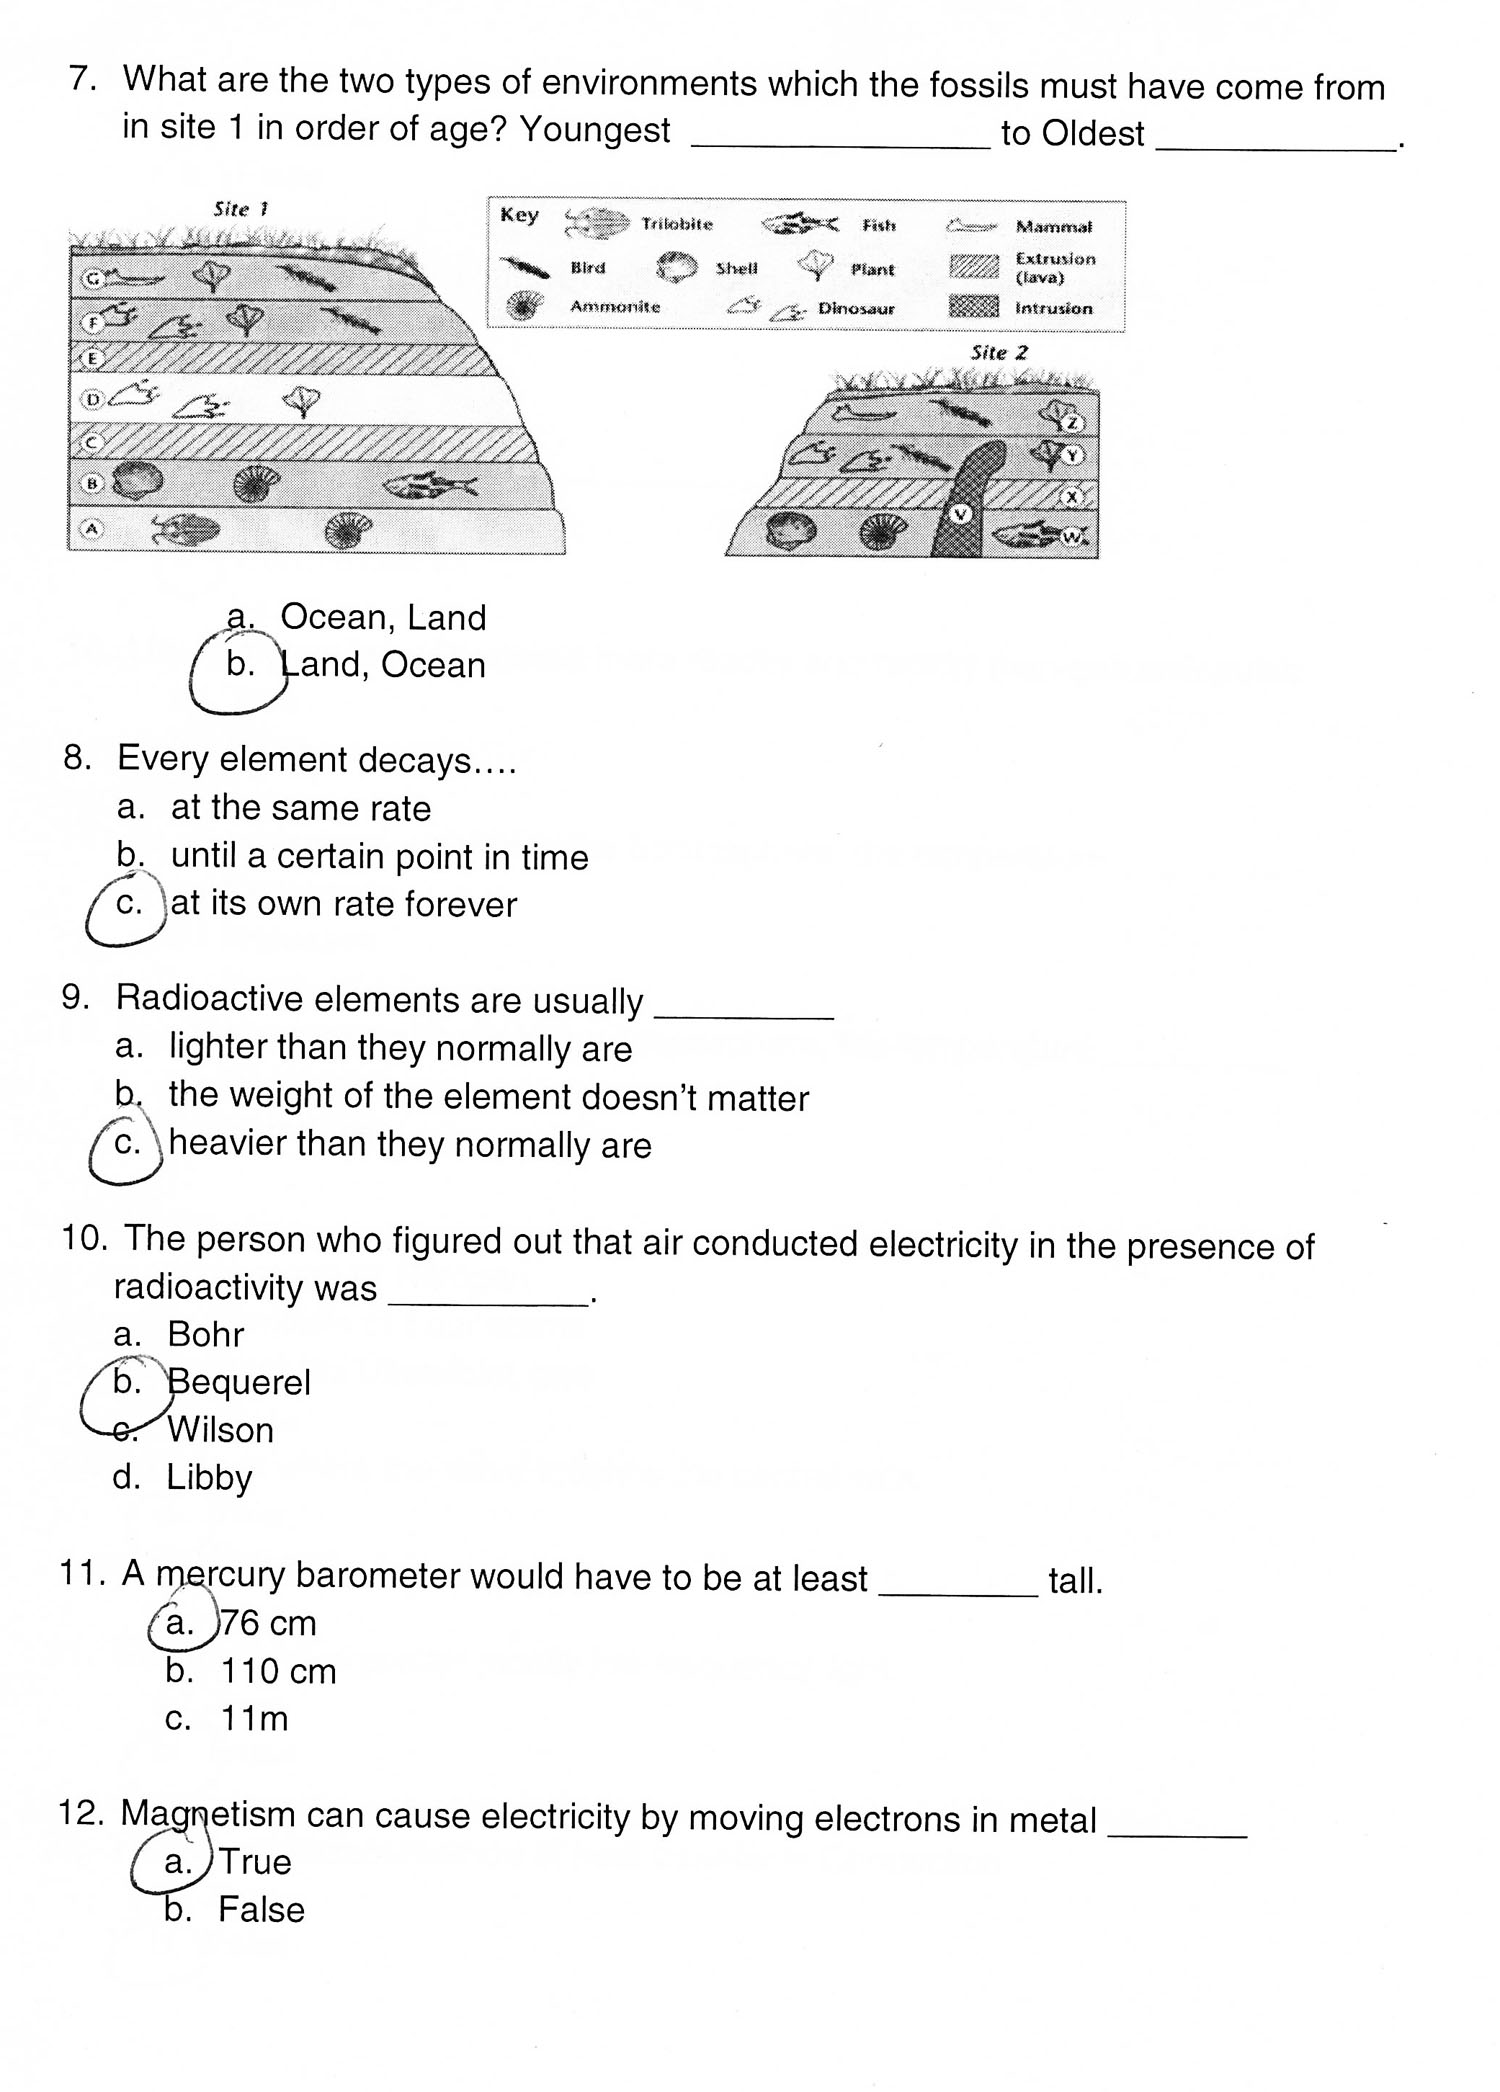 17-best-images-of-english-worksheets-for-8th-graders-8th-grade